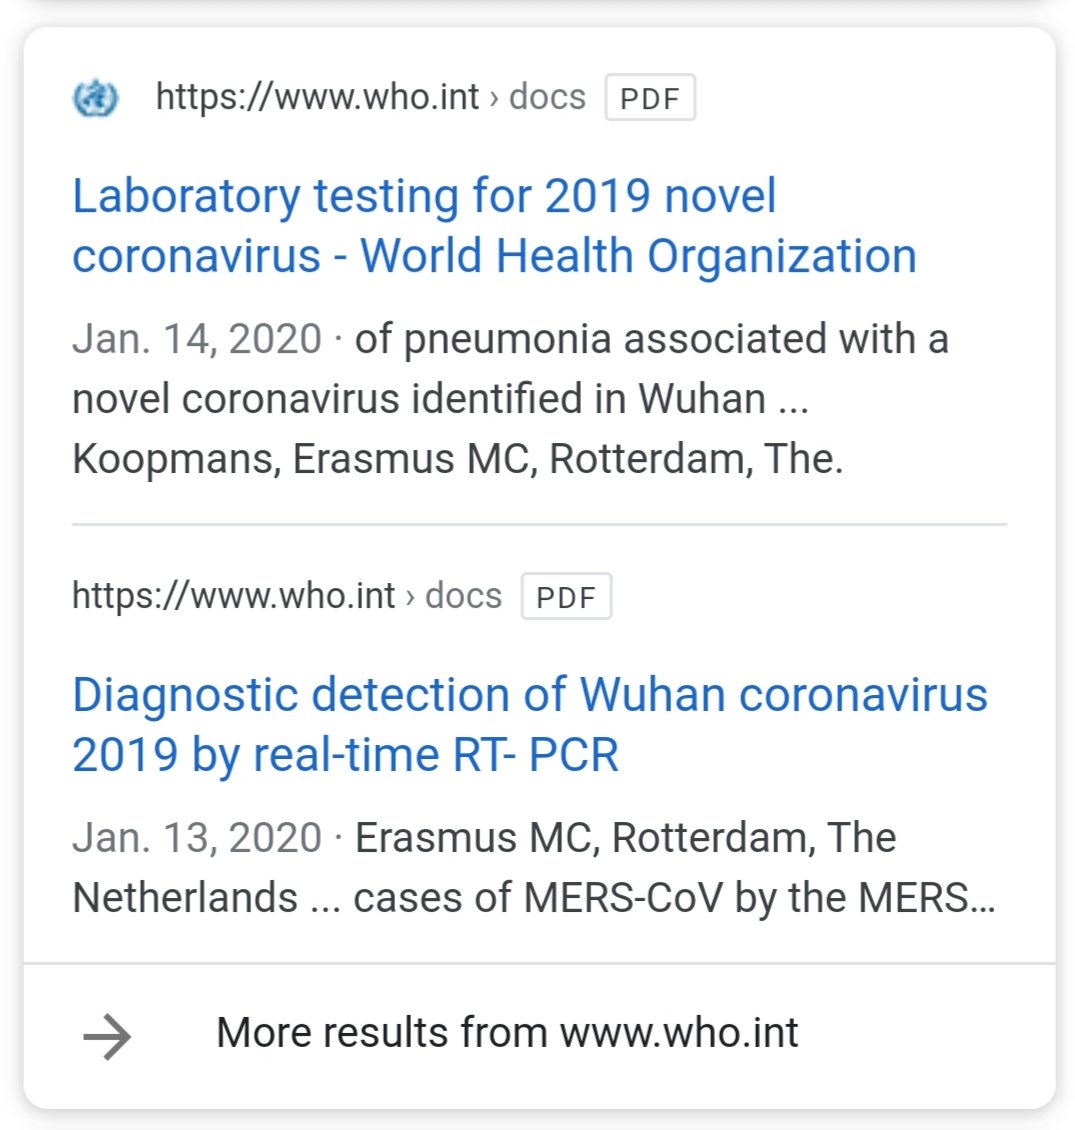 4) These two pdf files from the World Health Organization seem to suggest recent collaboration between this Dutch lab and teams working on the current novel coronavirus in Wuhan, China.